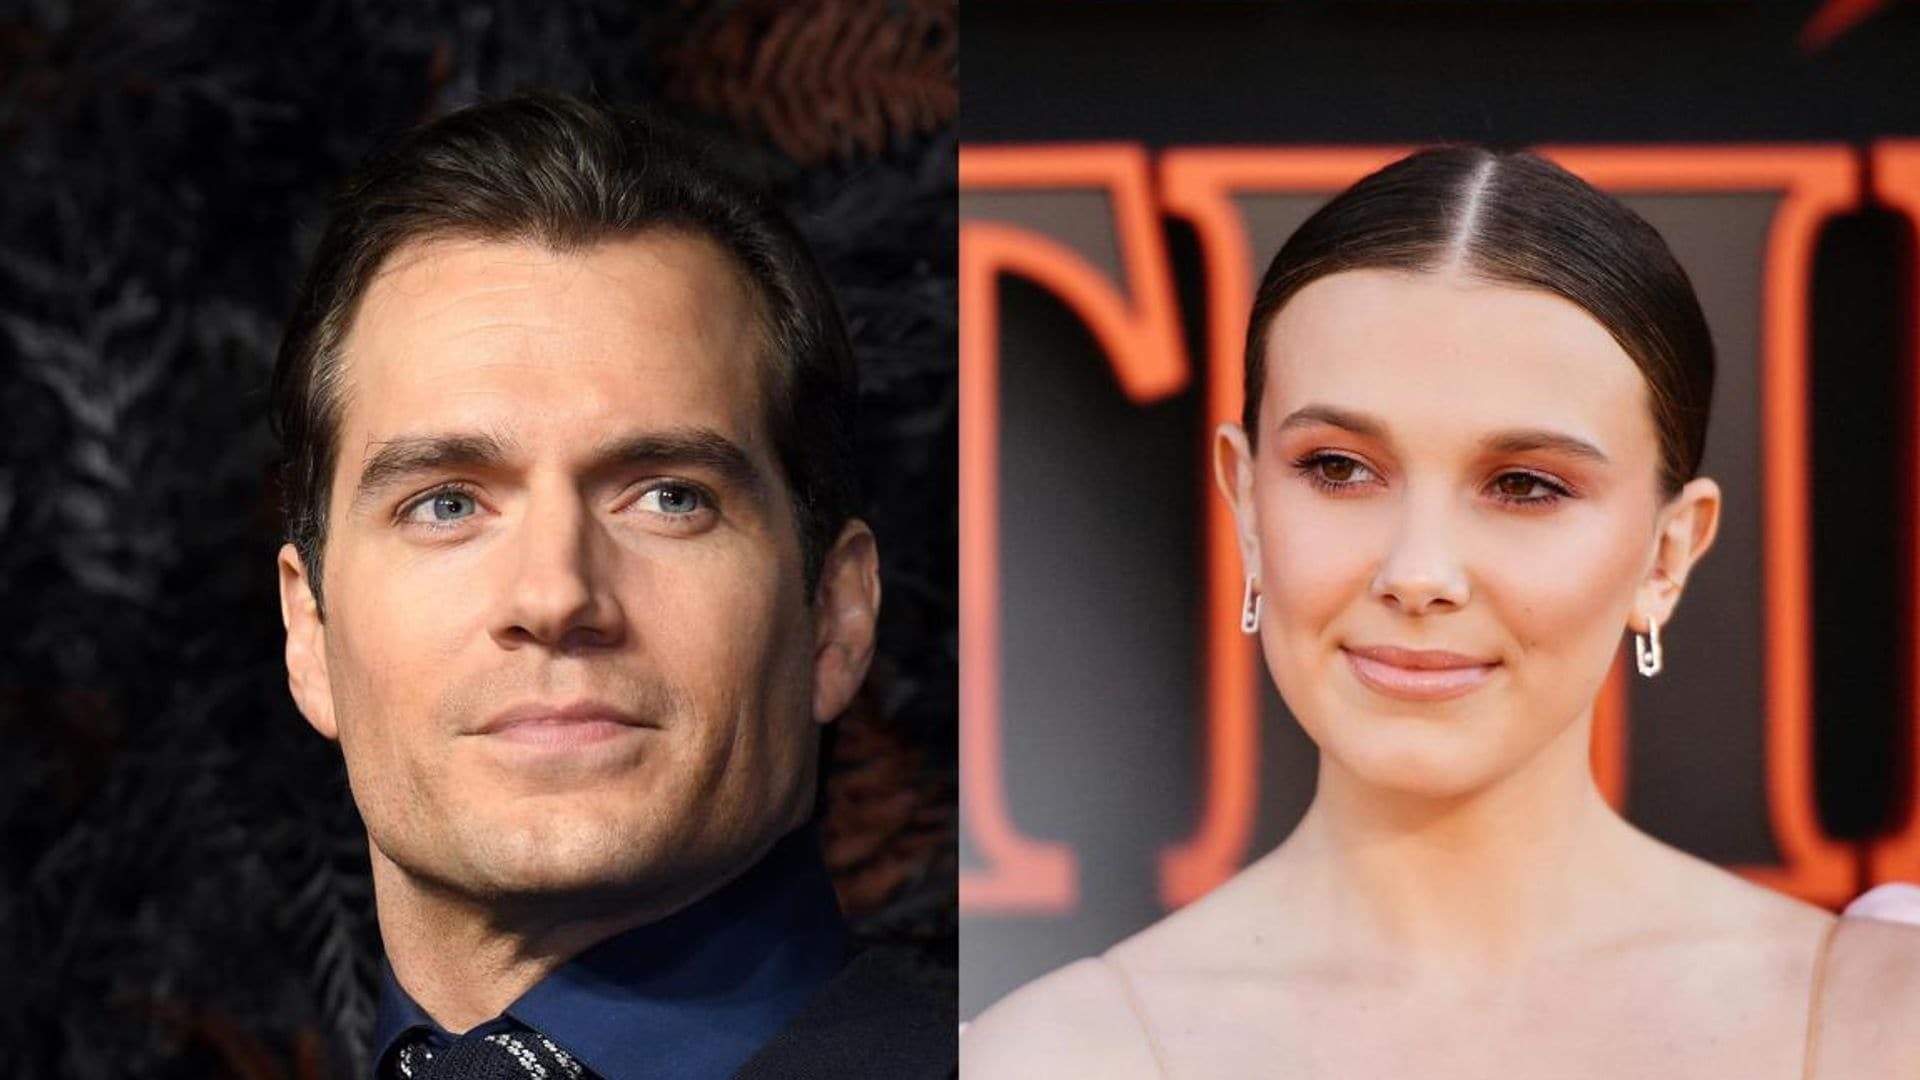 First Look at Netflix‘s upcoming ‘Enola Holmes’ with Millie Bobby Brown and Henry Cavill